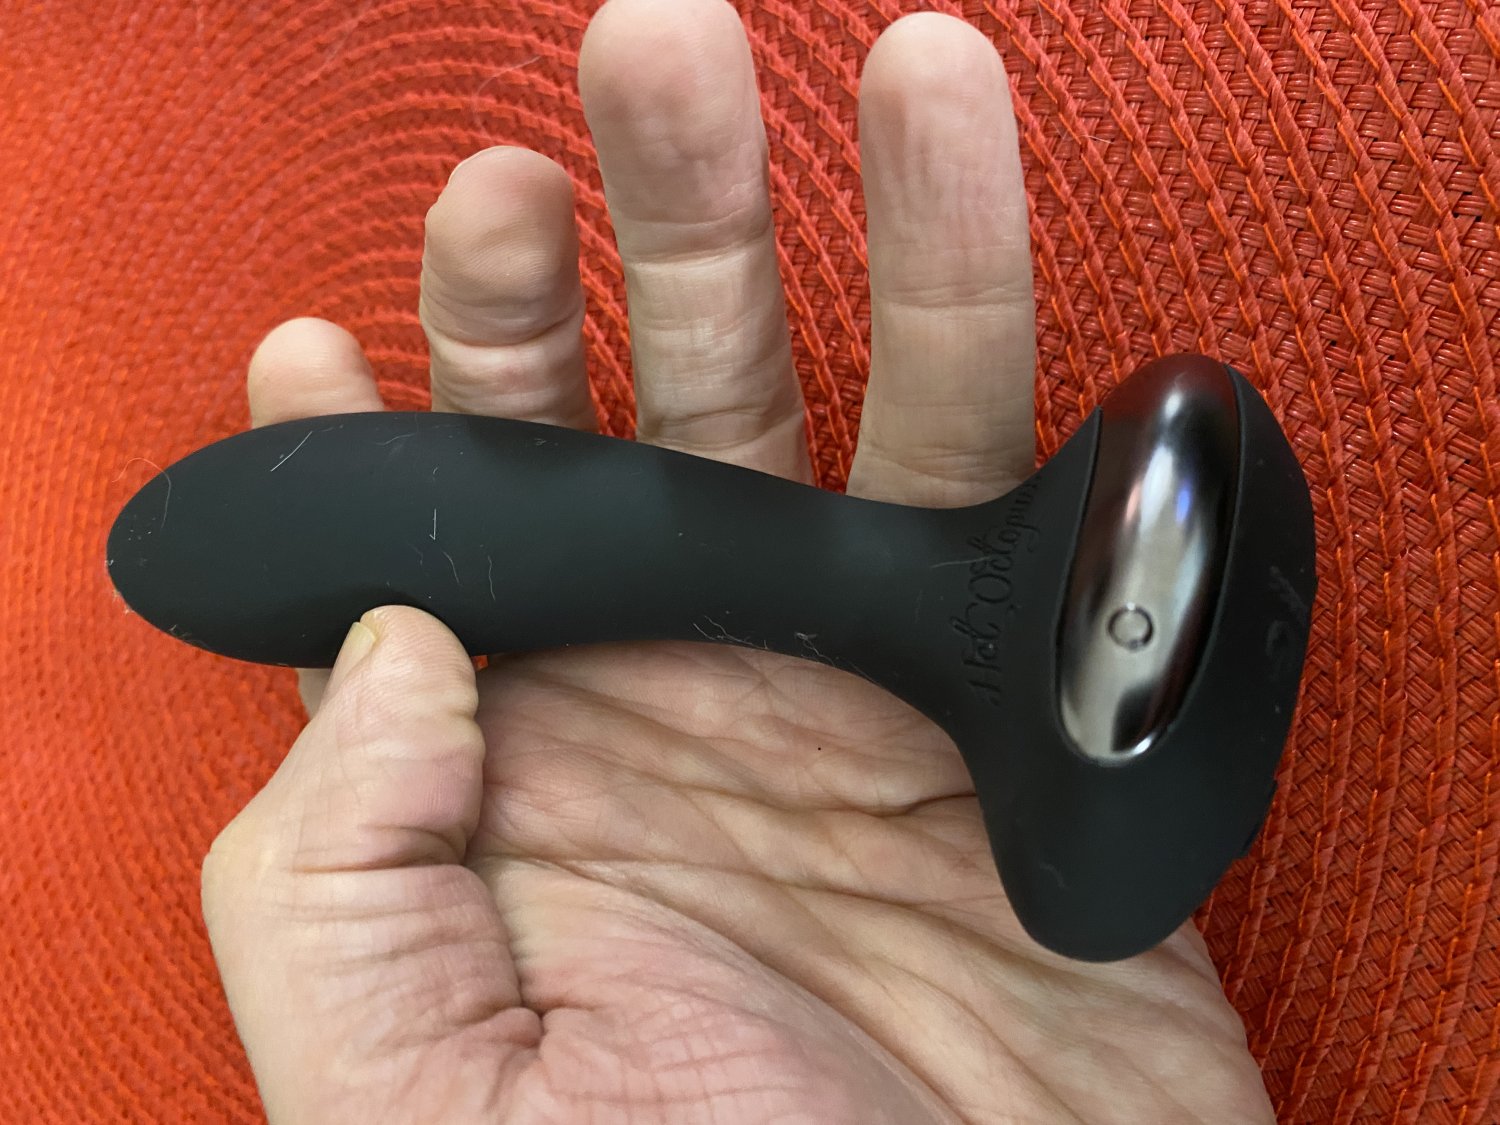 A person holds the PleX with Flex in their hand. The shaft of the plug looks slim compared to the hand.